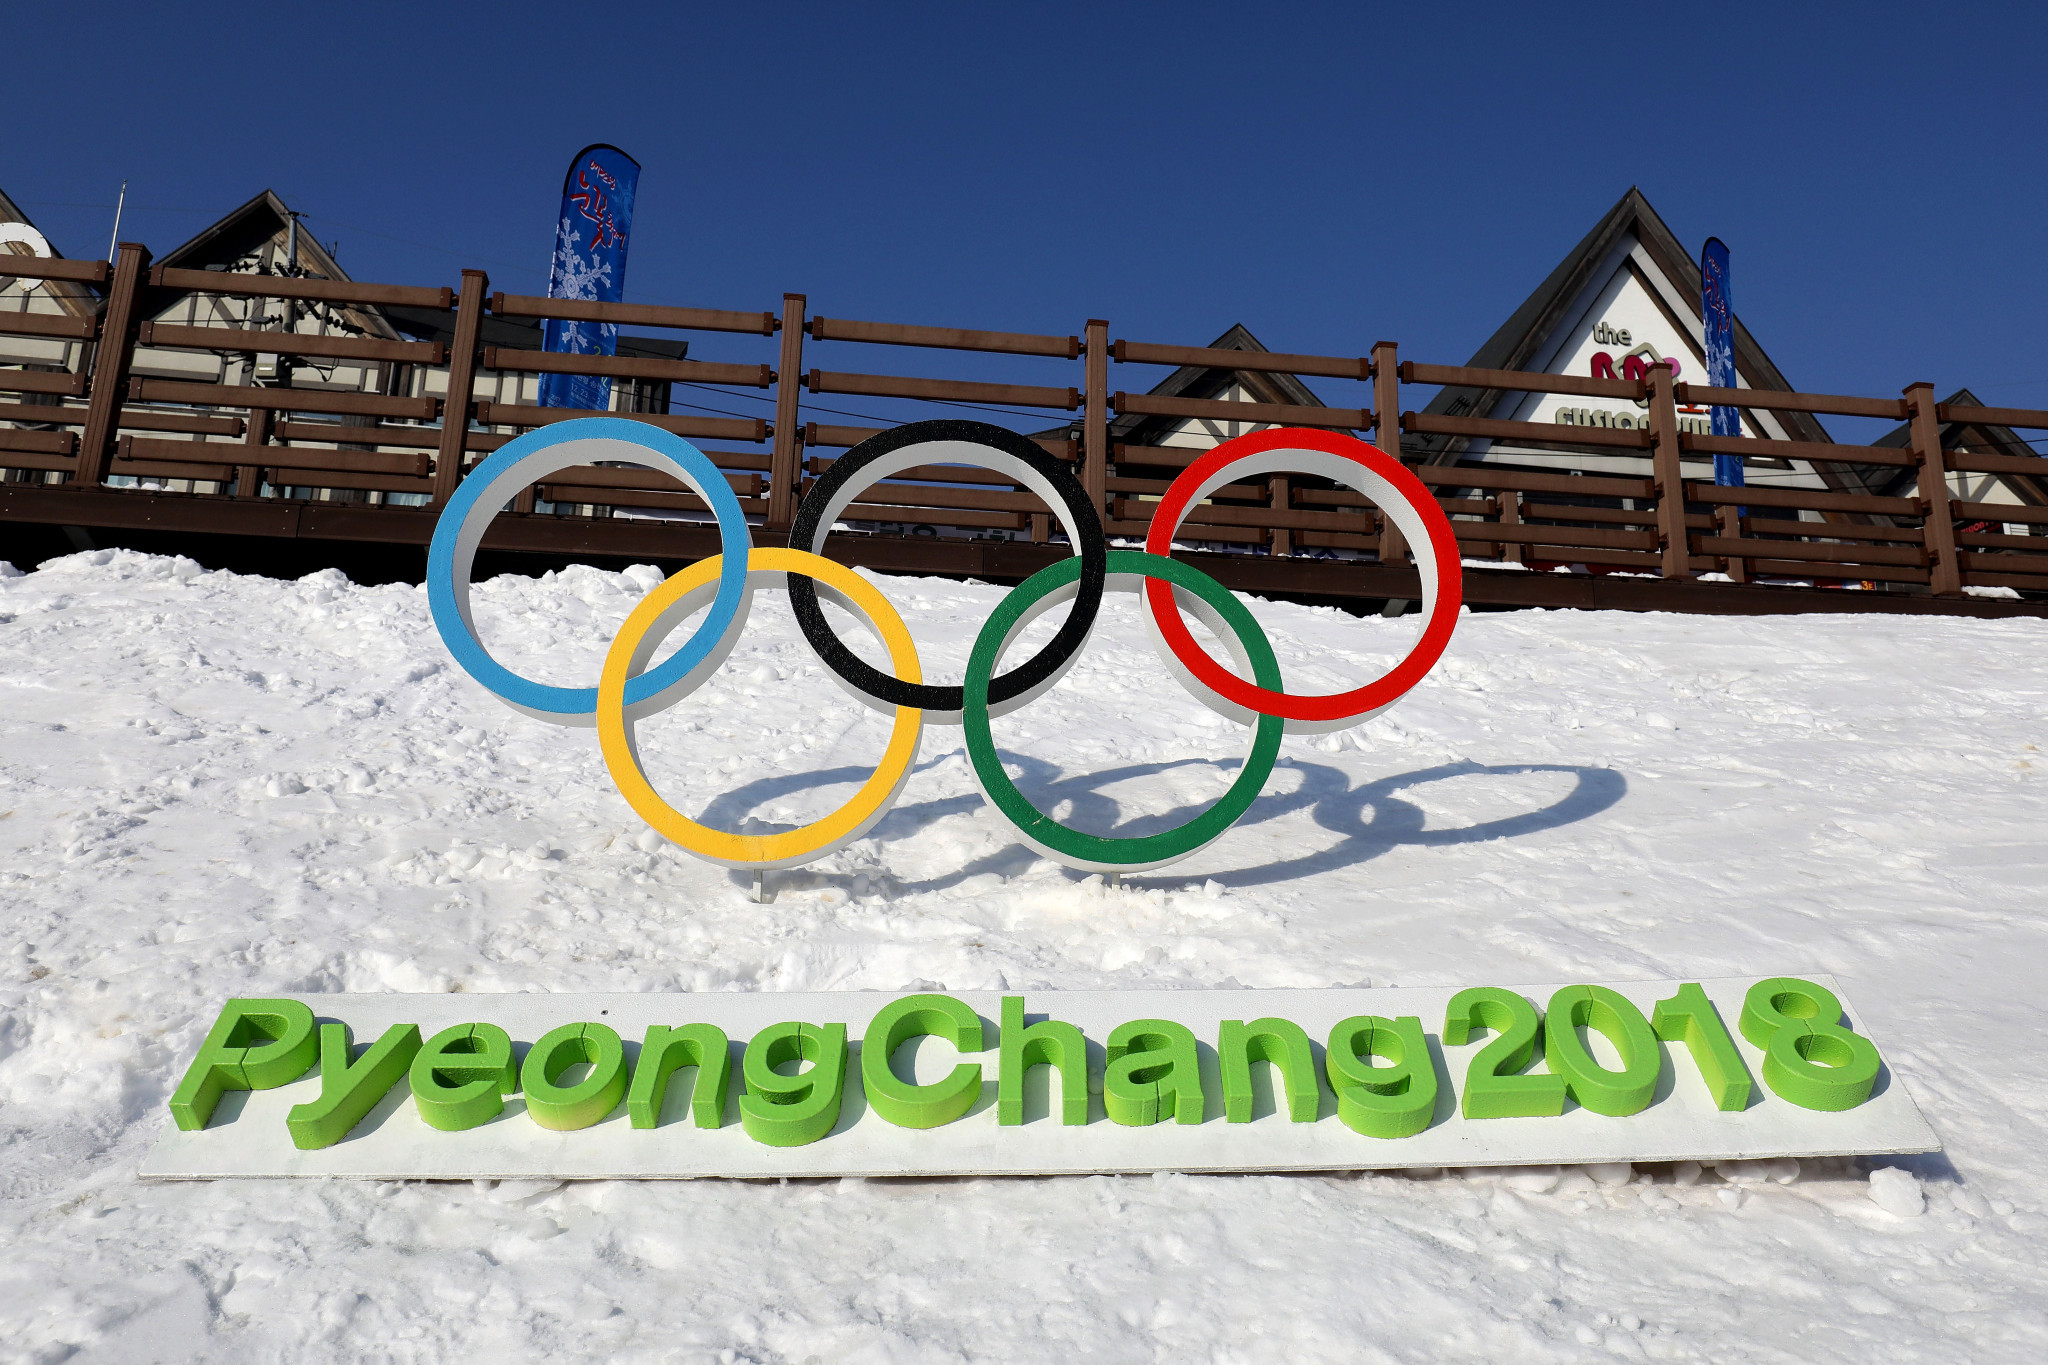 Pyeongchang 2018 preparations high on agenda at FIS Technical Committee meetings